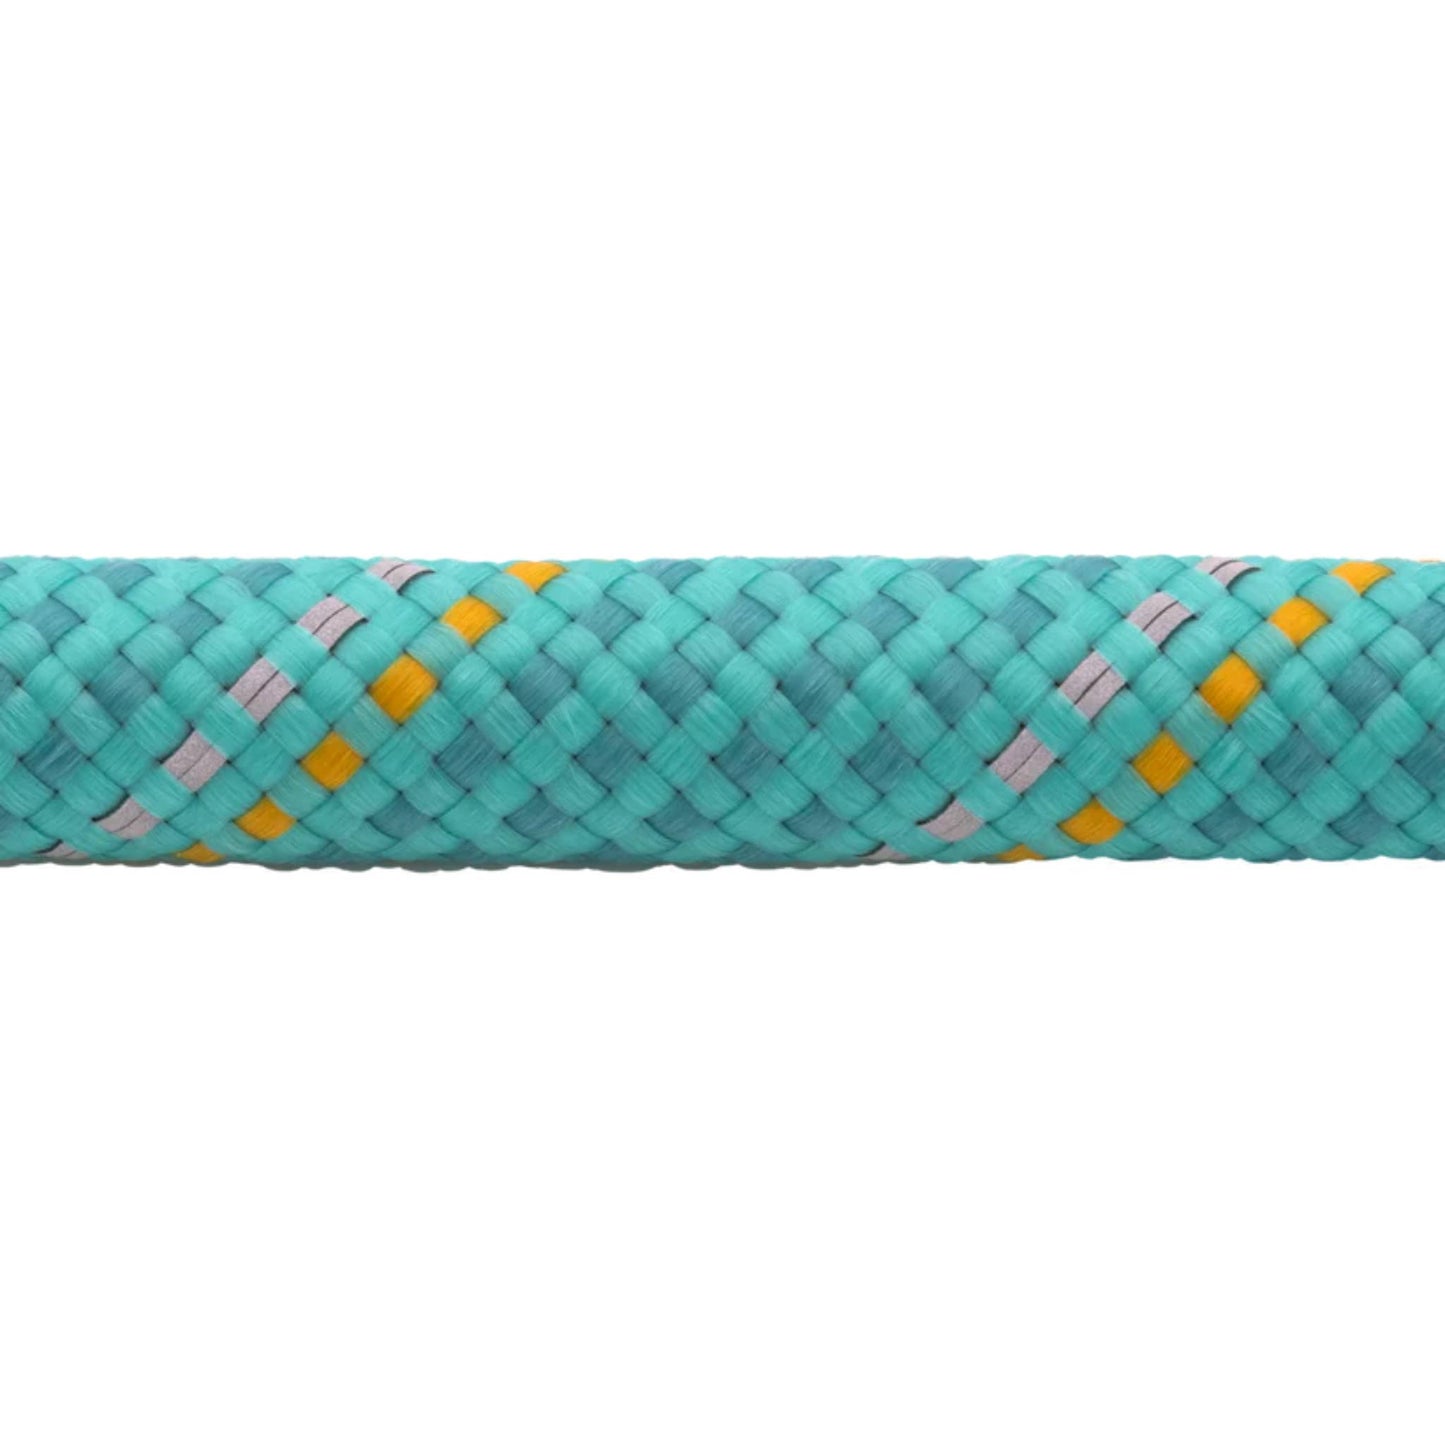 Ruffwear Knot a Long rope dog lead teal close up